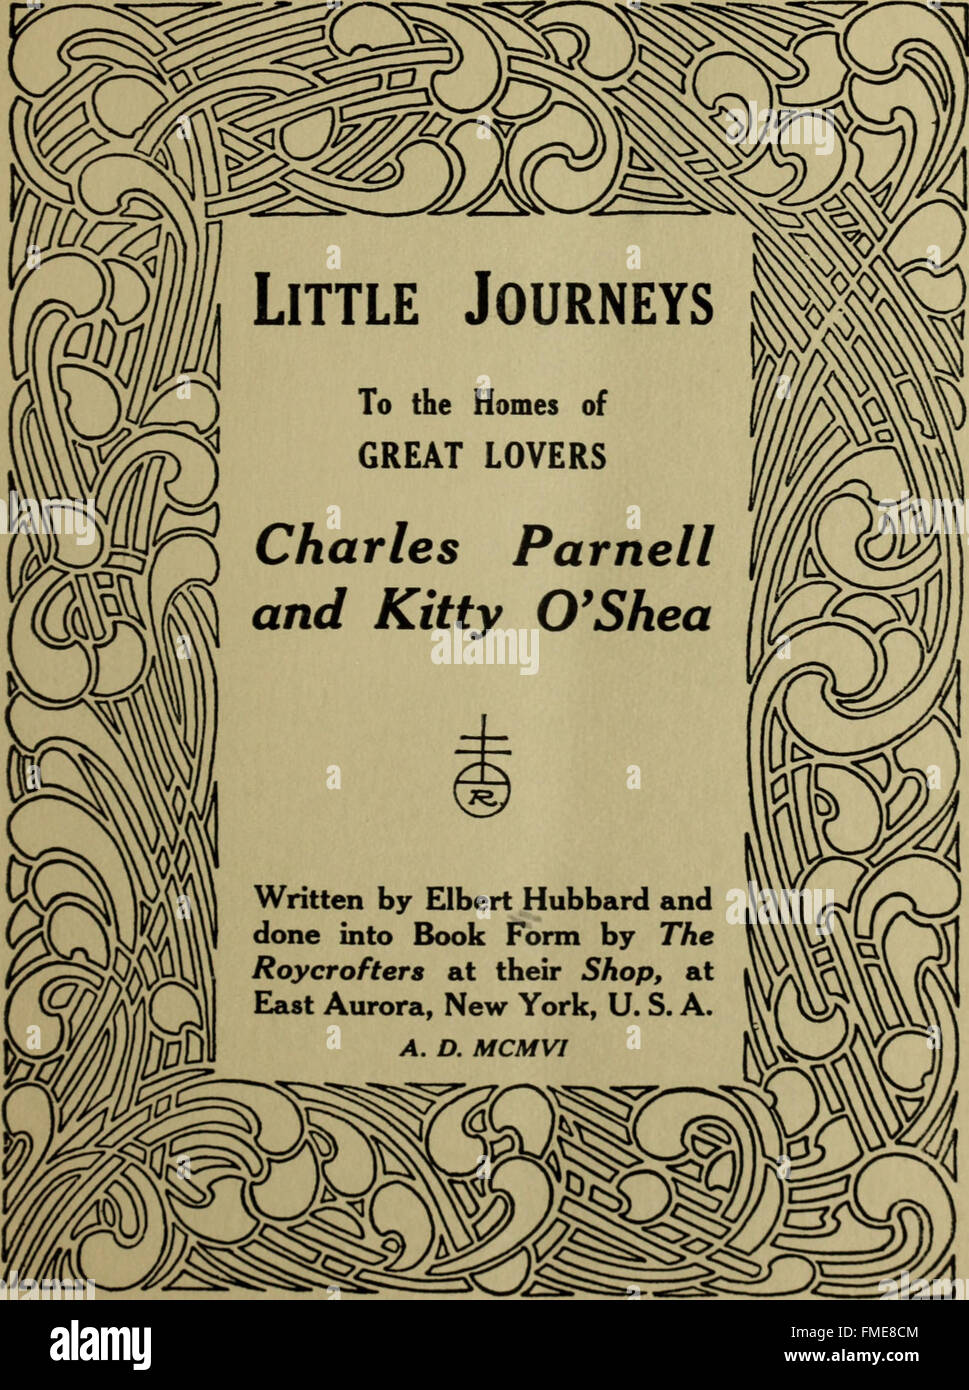 Little journeys to the homes of great lovers - Charles Parnell and Kitty O'Shea (1906) Stock Photo